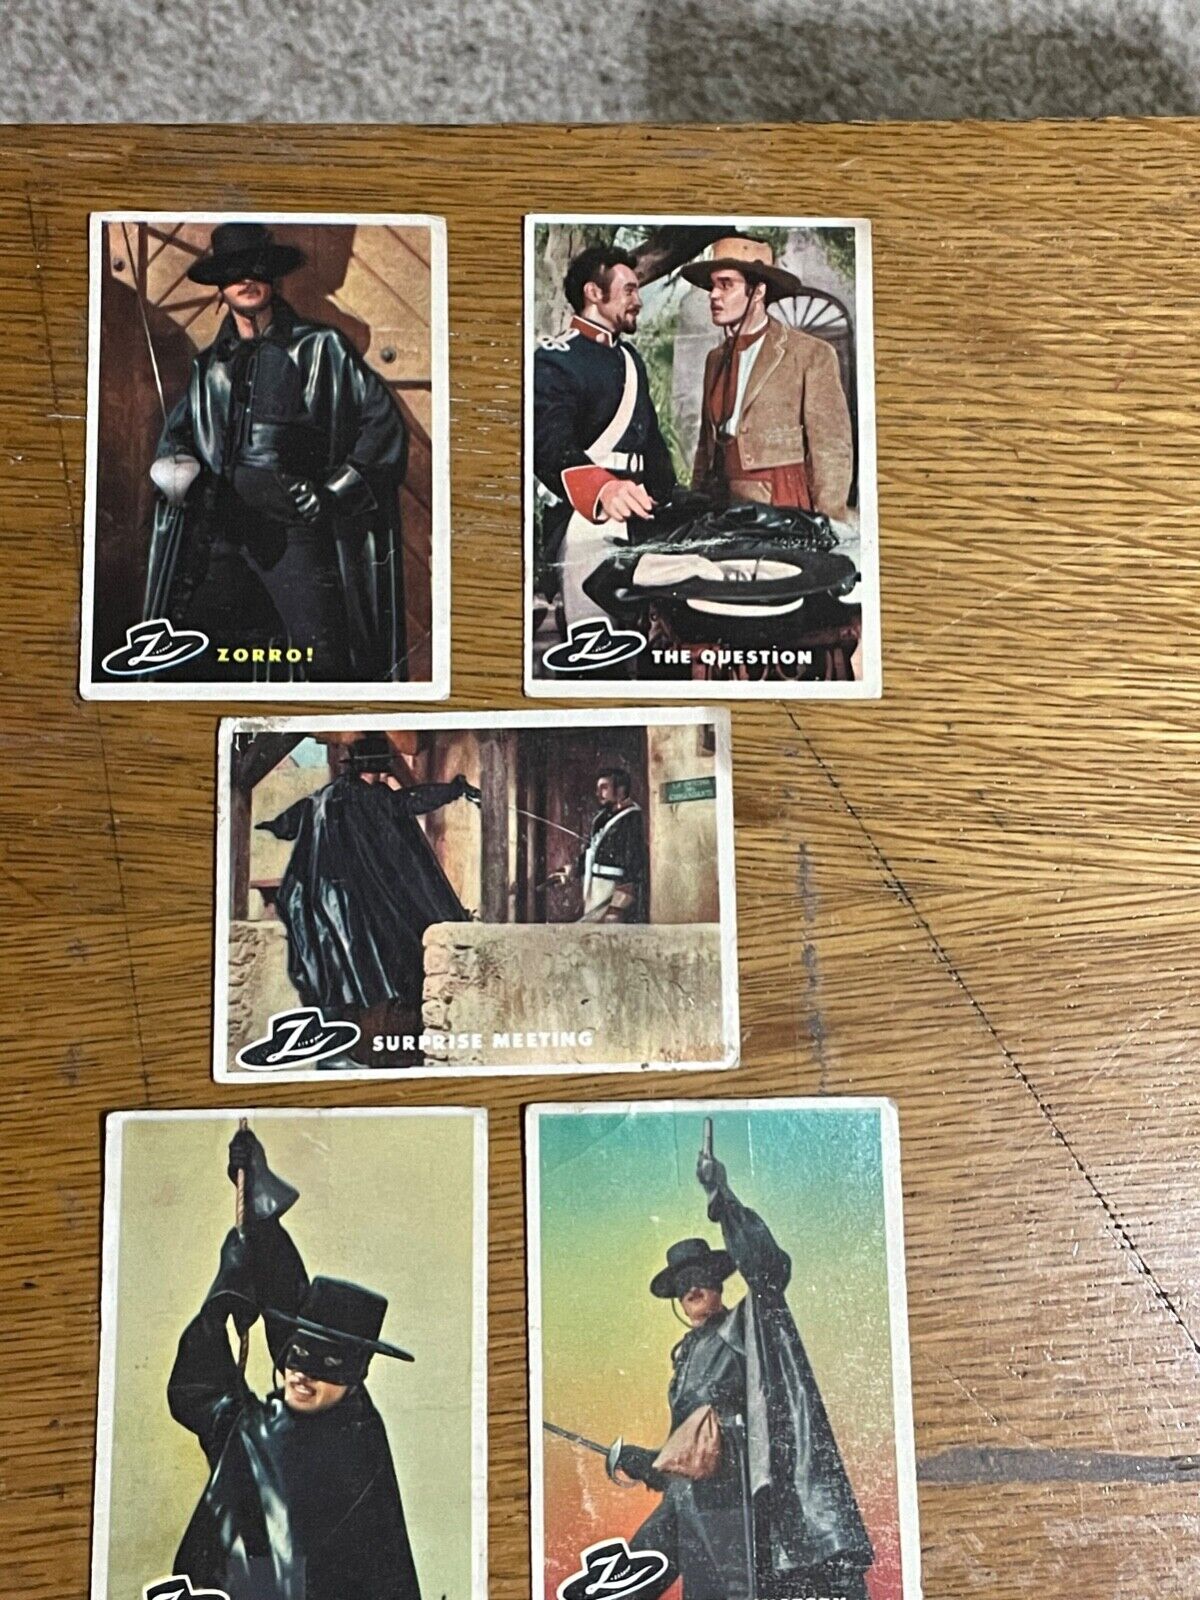 1958 Topps Zorros trading cards Pictures will show condition. Numbers in Comment